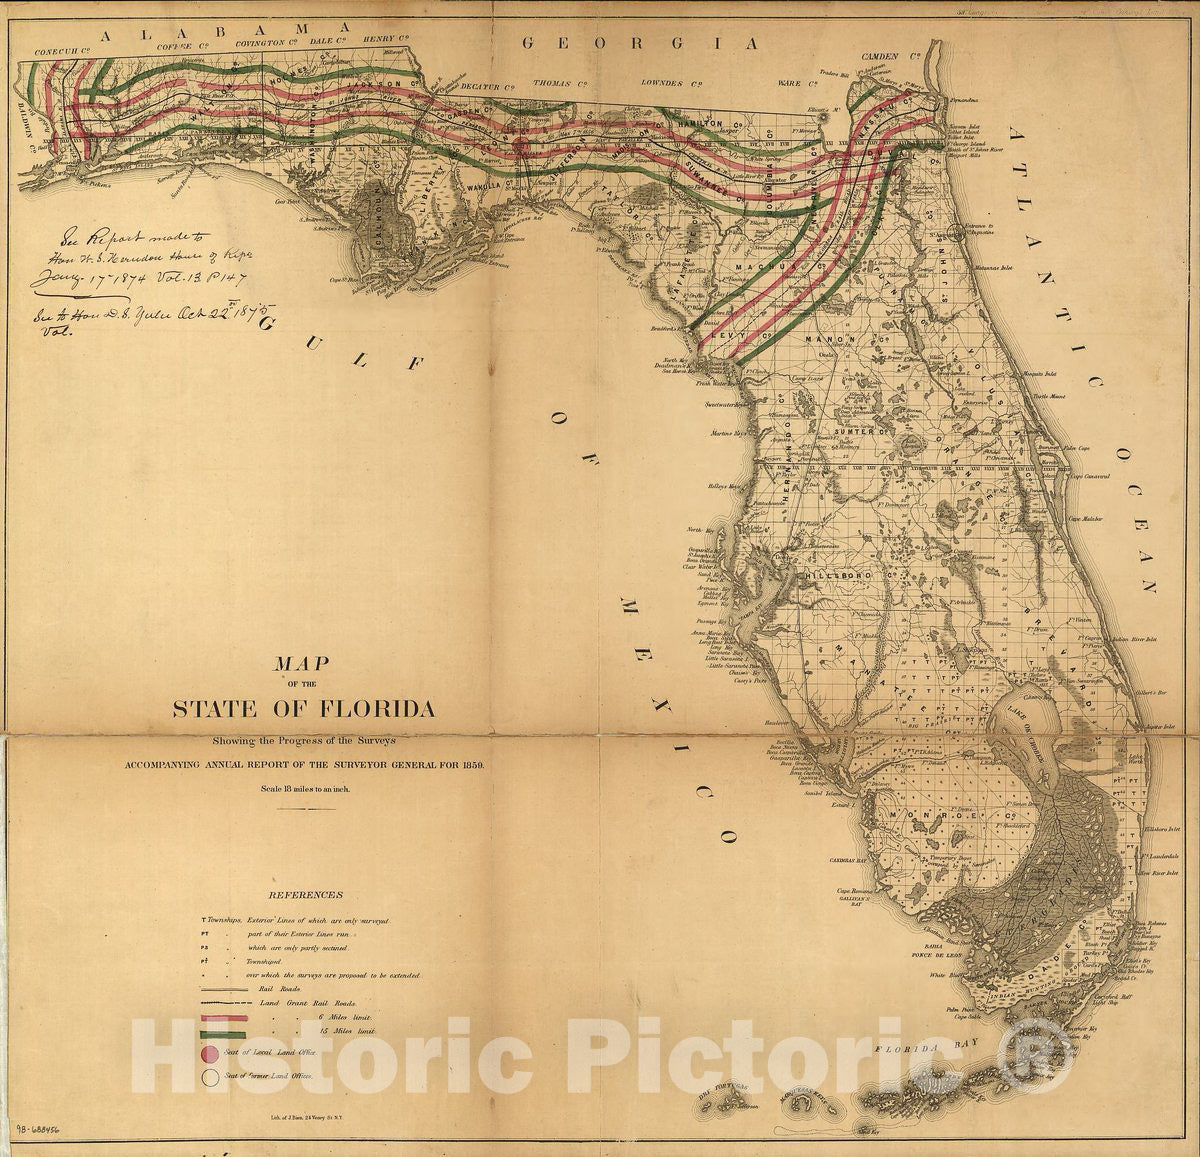 Historic 1859 Map - Map of The State of Florida Showing The Progress of The surveys accompanying Annual Report of The Surveyor General for 1859.